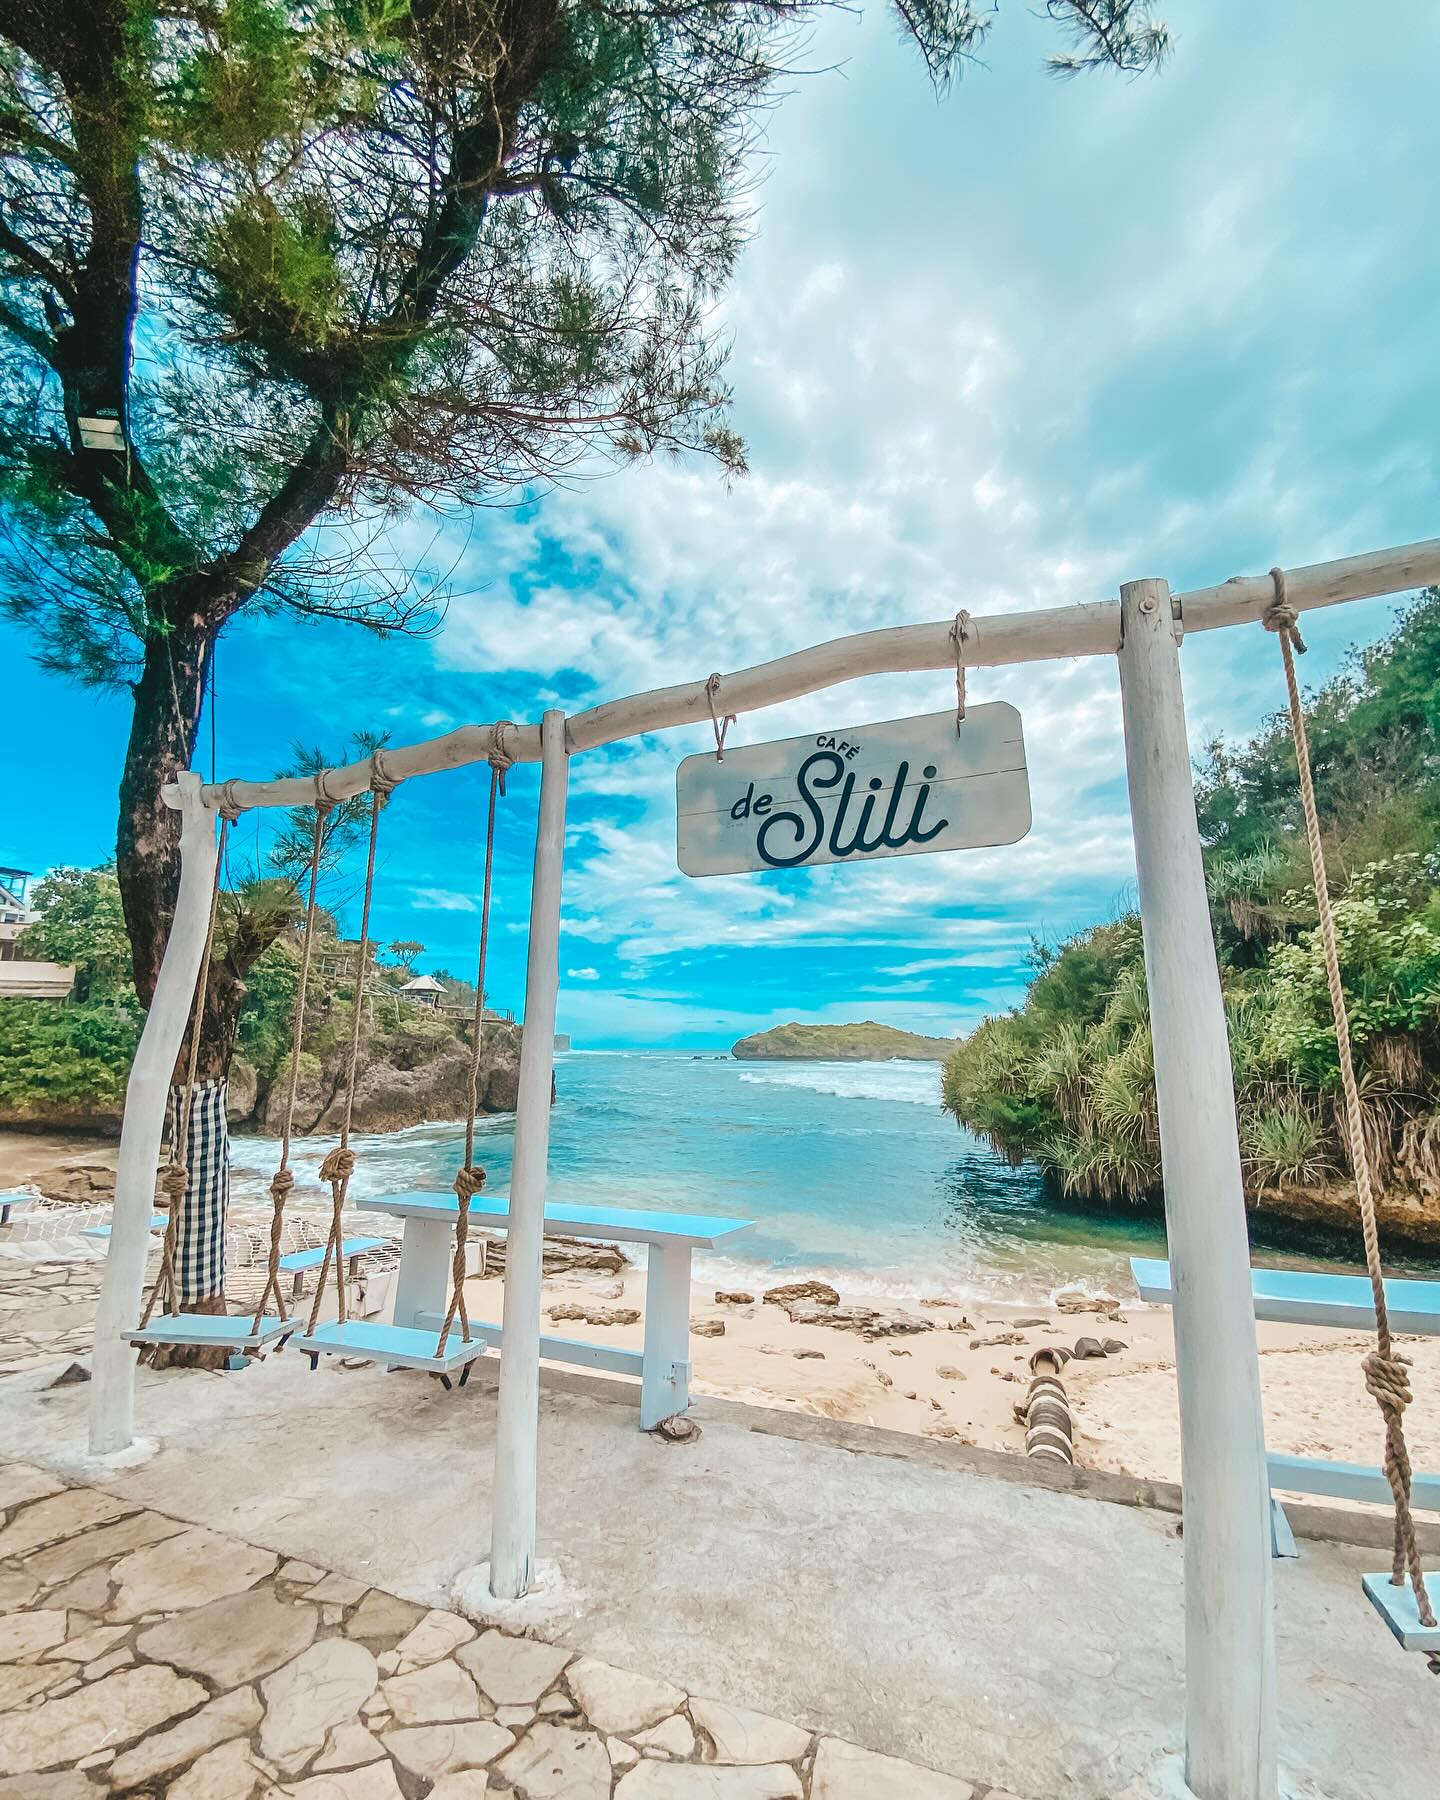 Swing set and a sign for de Slili Cafe with the ocean in the background at Slili Beach.